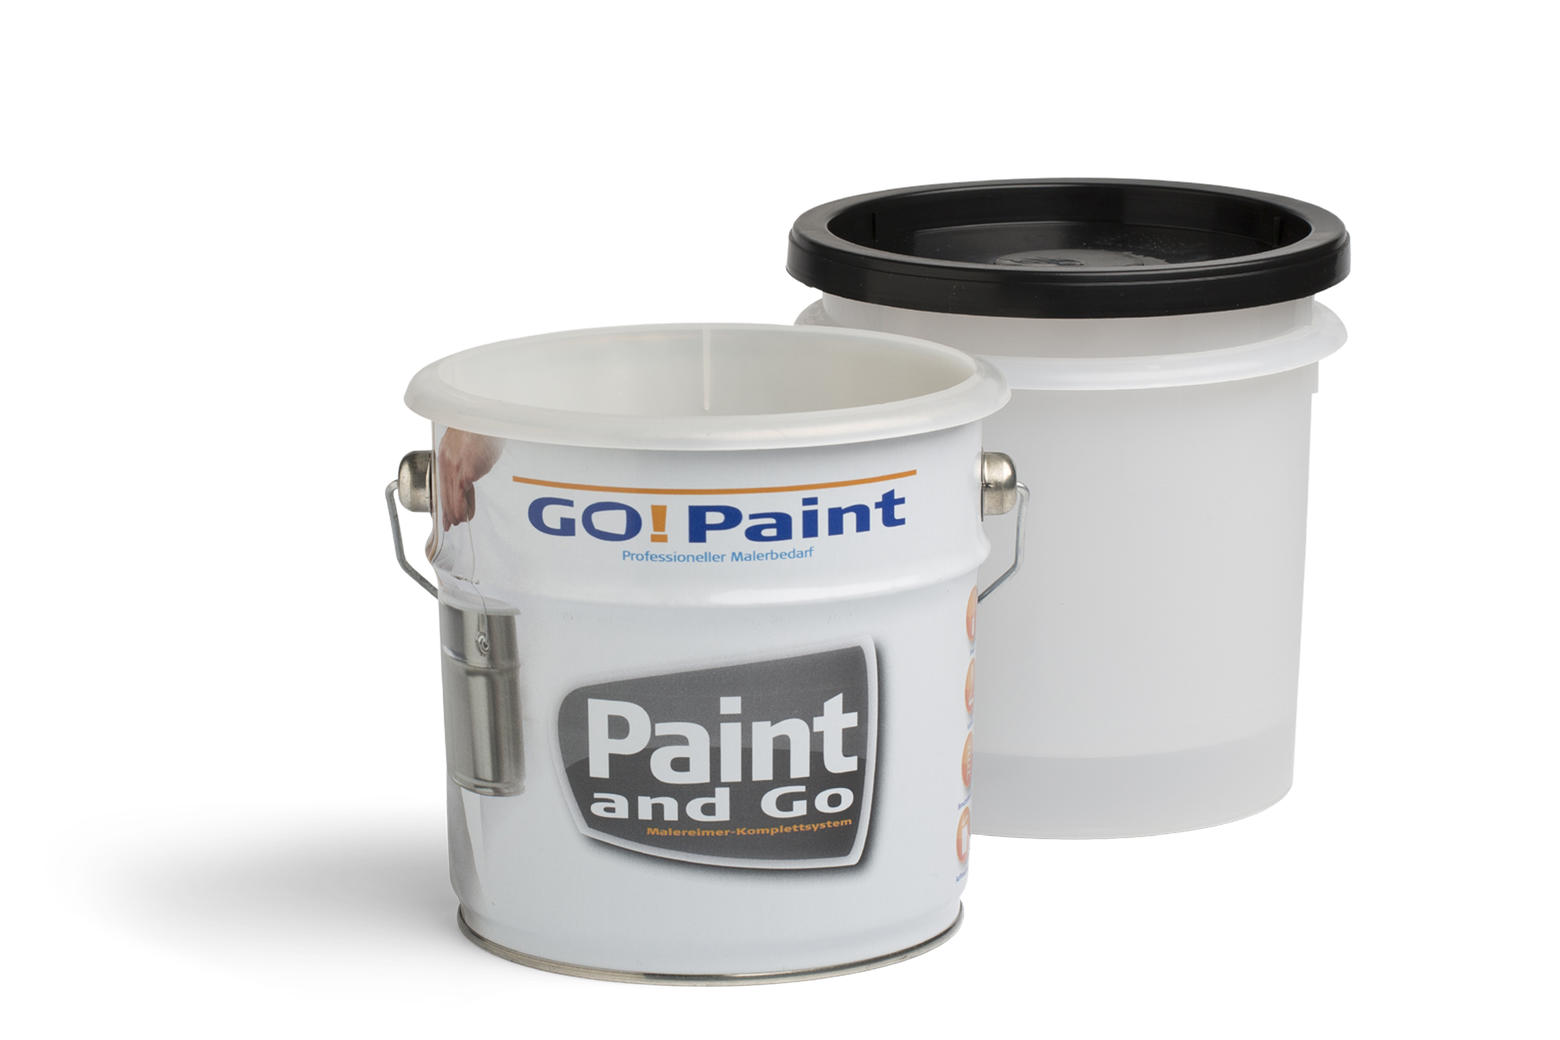  The Paint and Go is a paint kettle containing a plastic liner that can be closed with a lid for overnight storage.